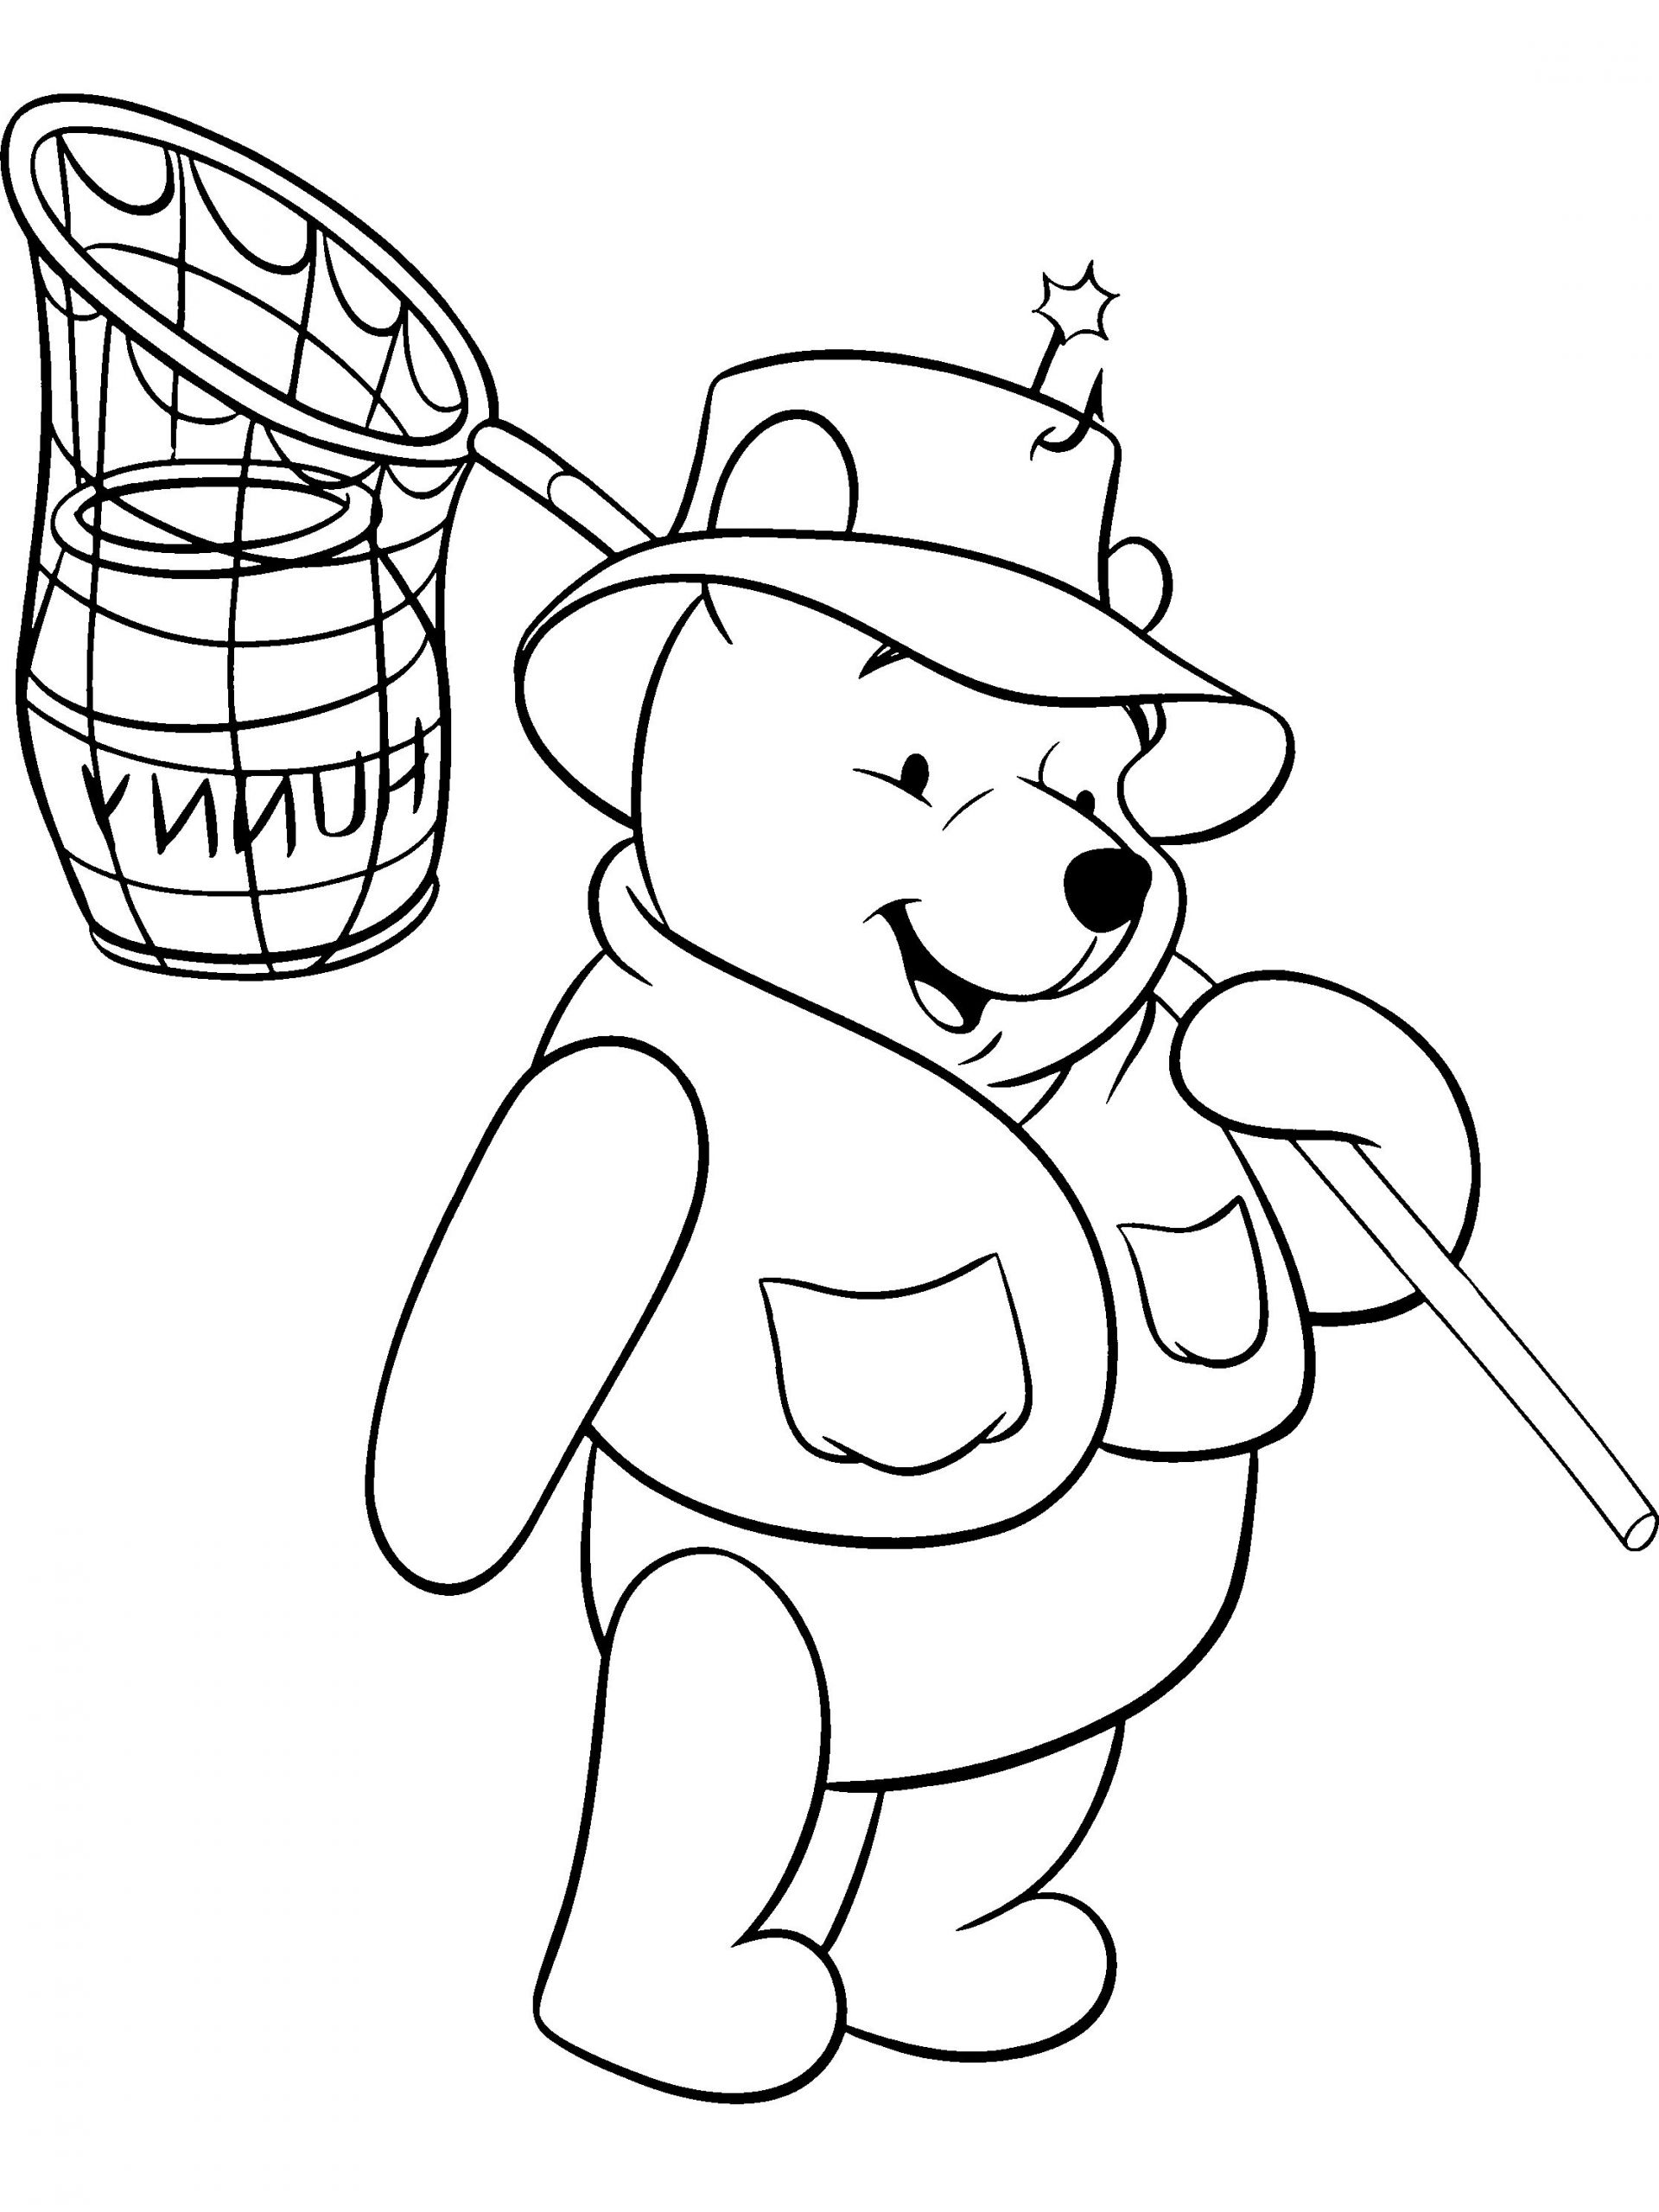 Winnie The Pooh Printable Coloring Pages
 Winnie the Pooh Coloring Pages